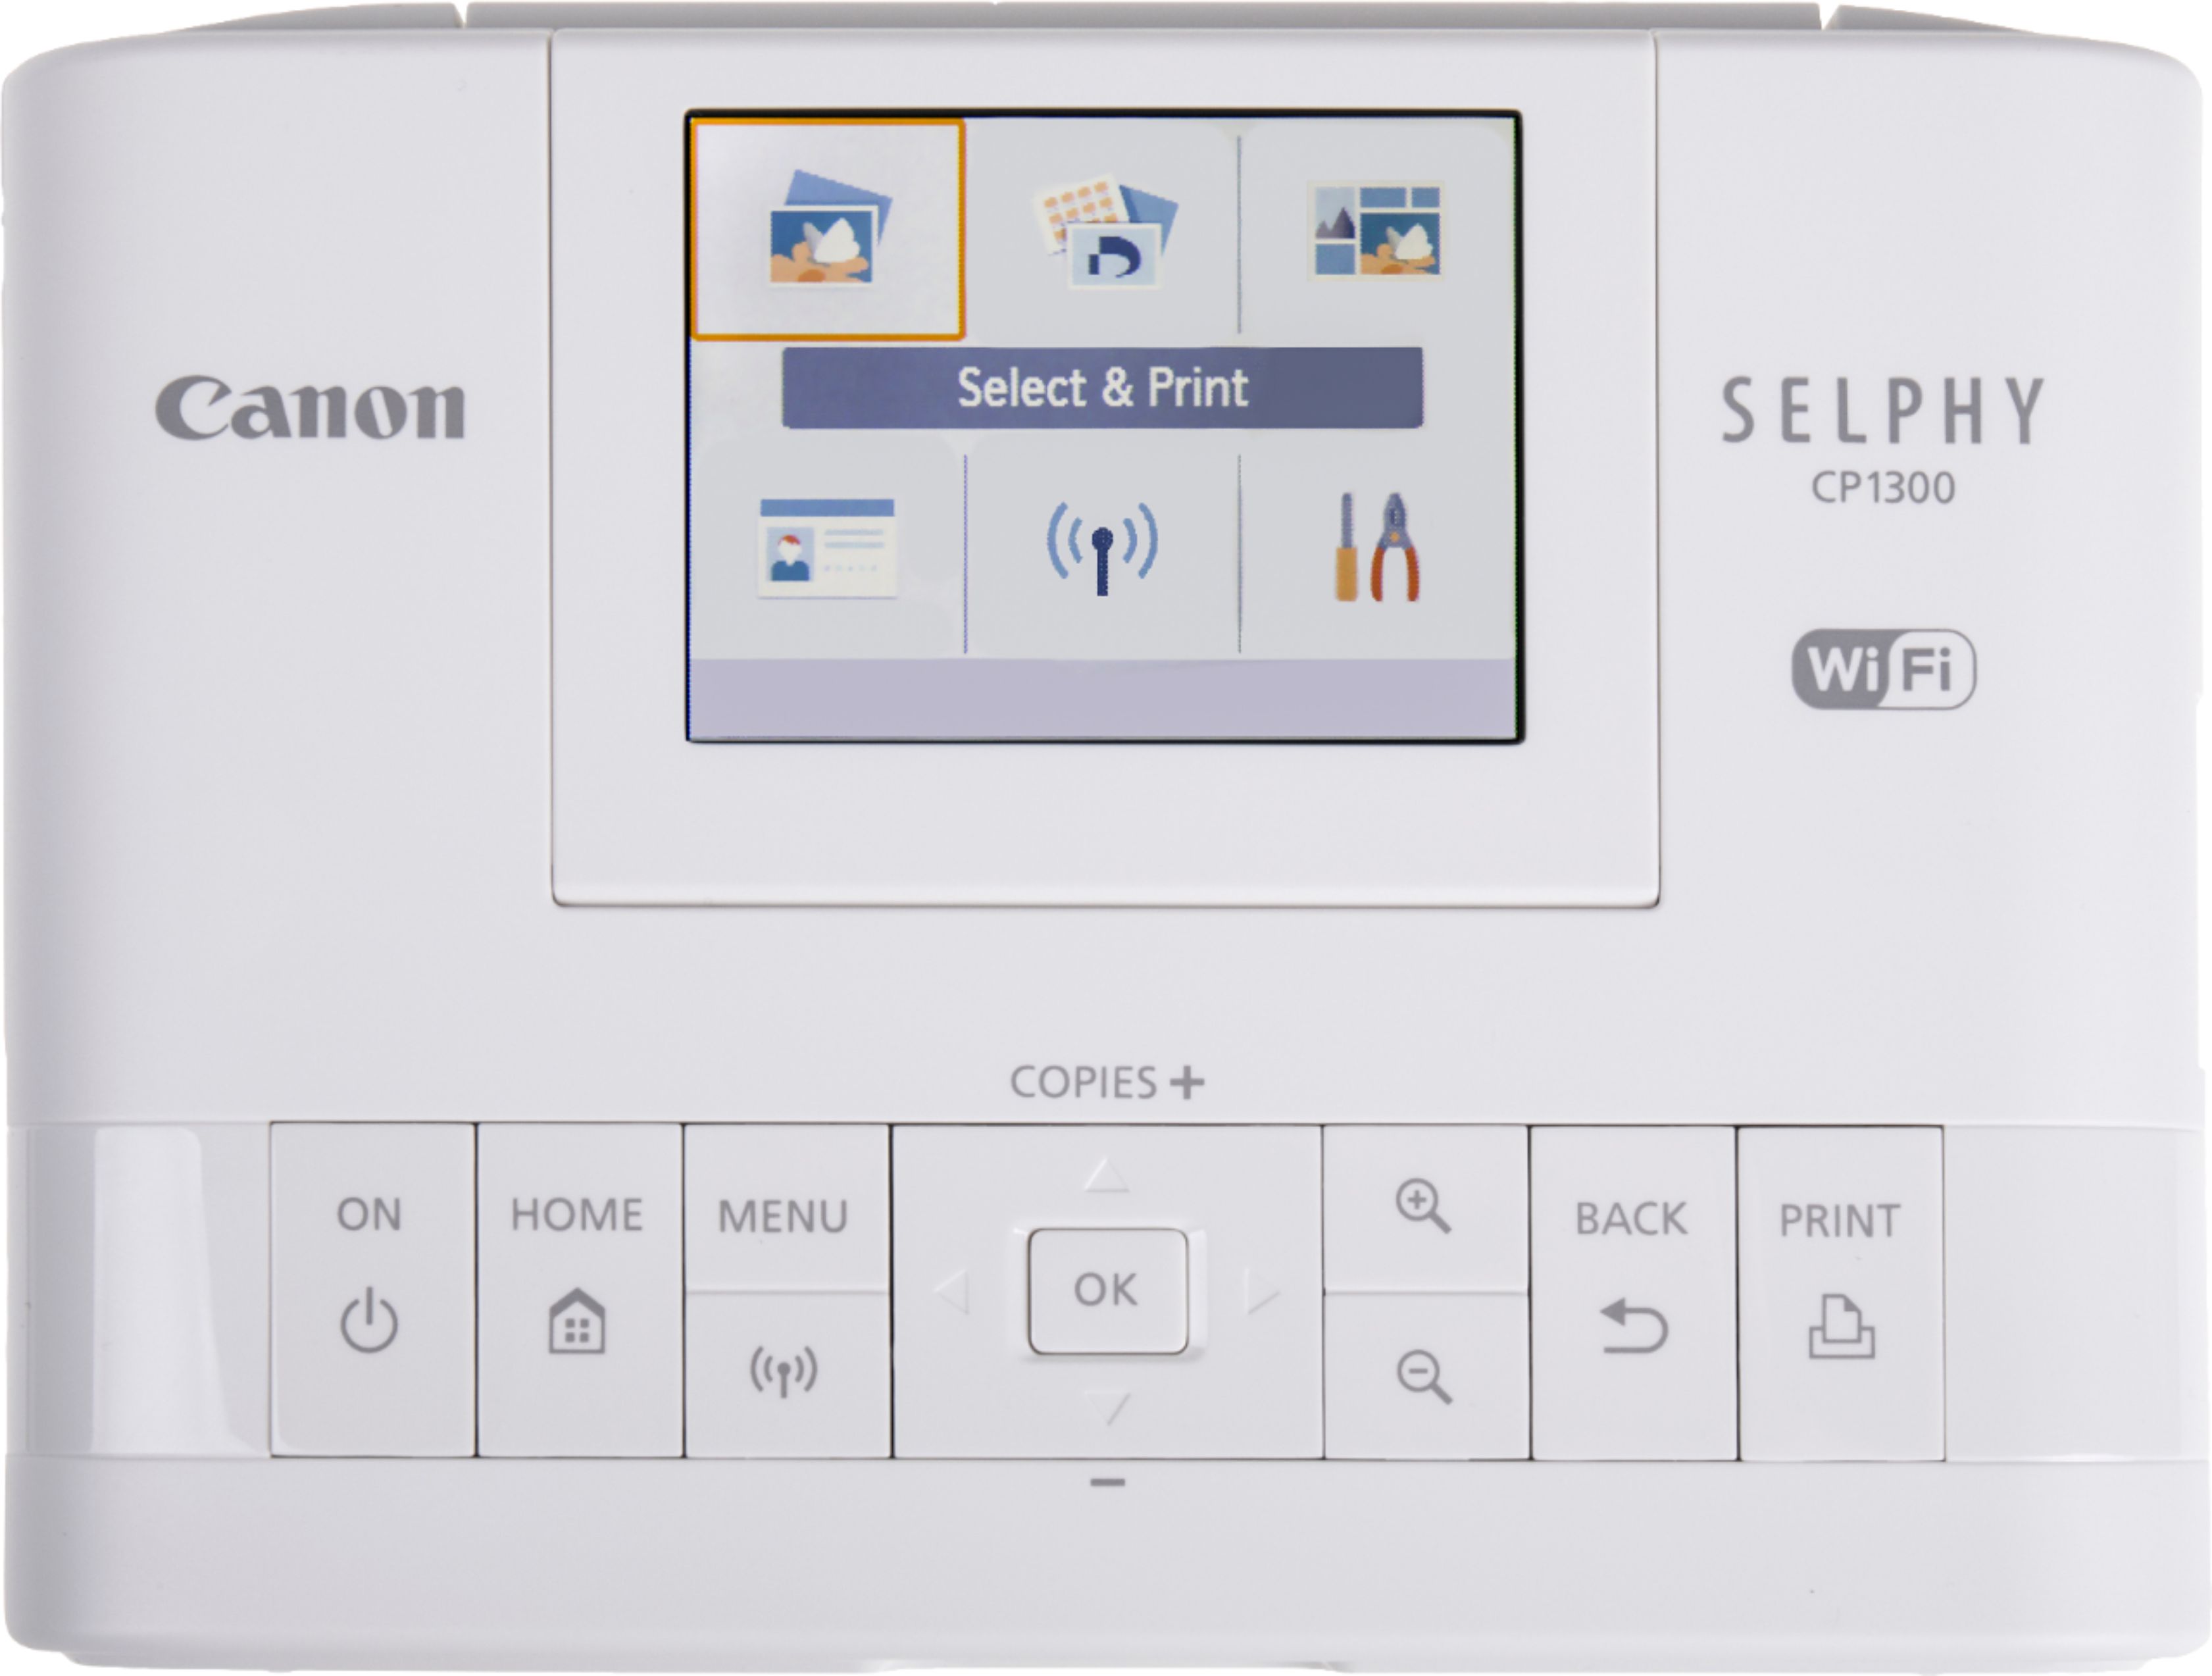 Canon Selphy CP1300: How to Setup and Print Pictures 